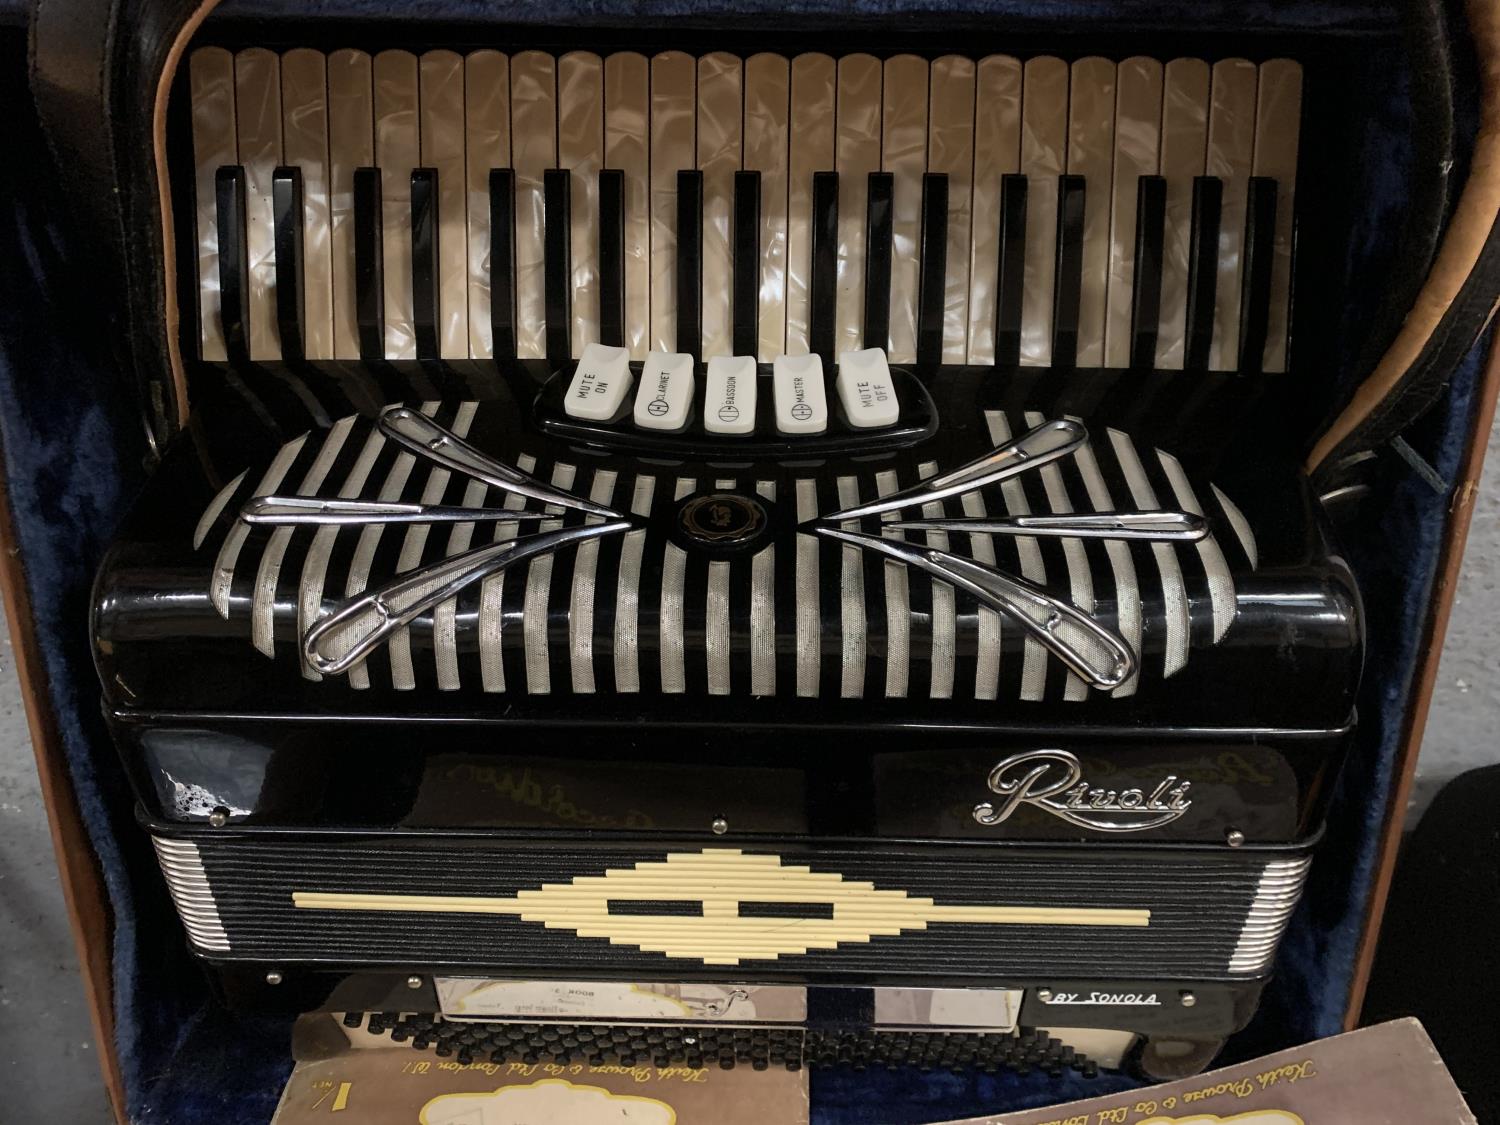 A VINTAGE ACCORDION IN A LEATHER EFFECT CARRY CASE - Image 2 of 6